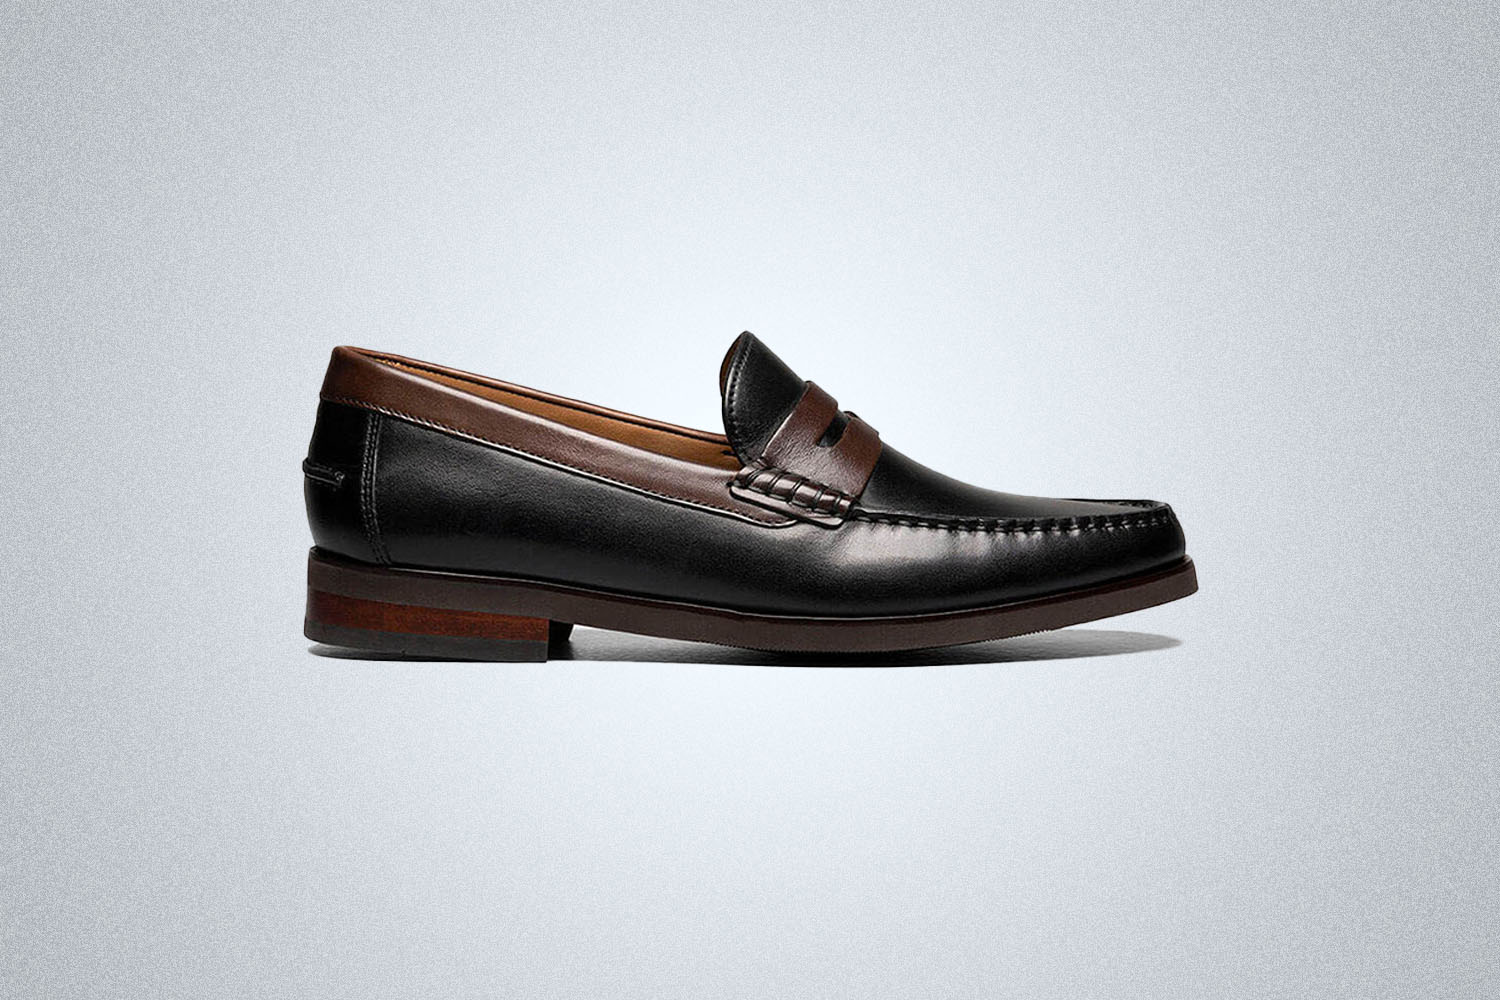 a pair of black and brown loafers from Florsheim on a grey background